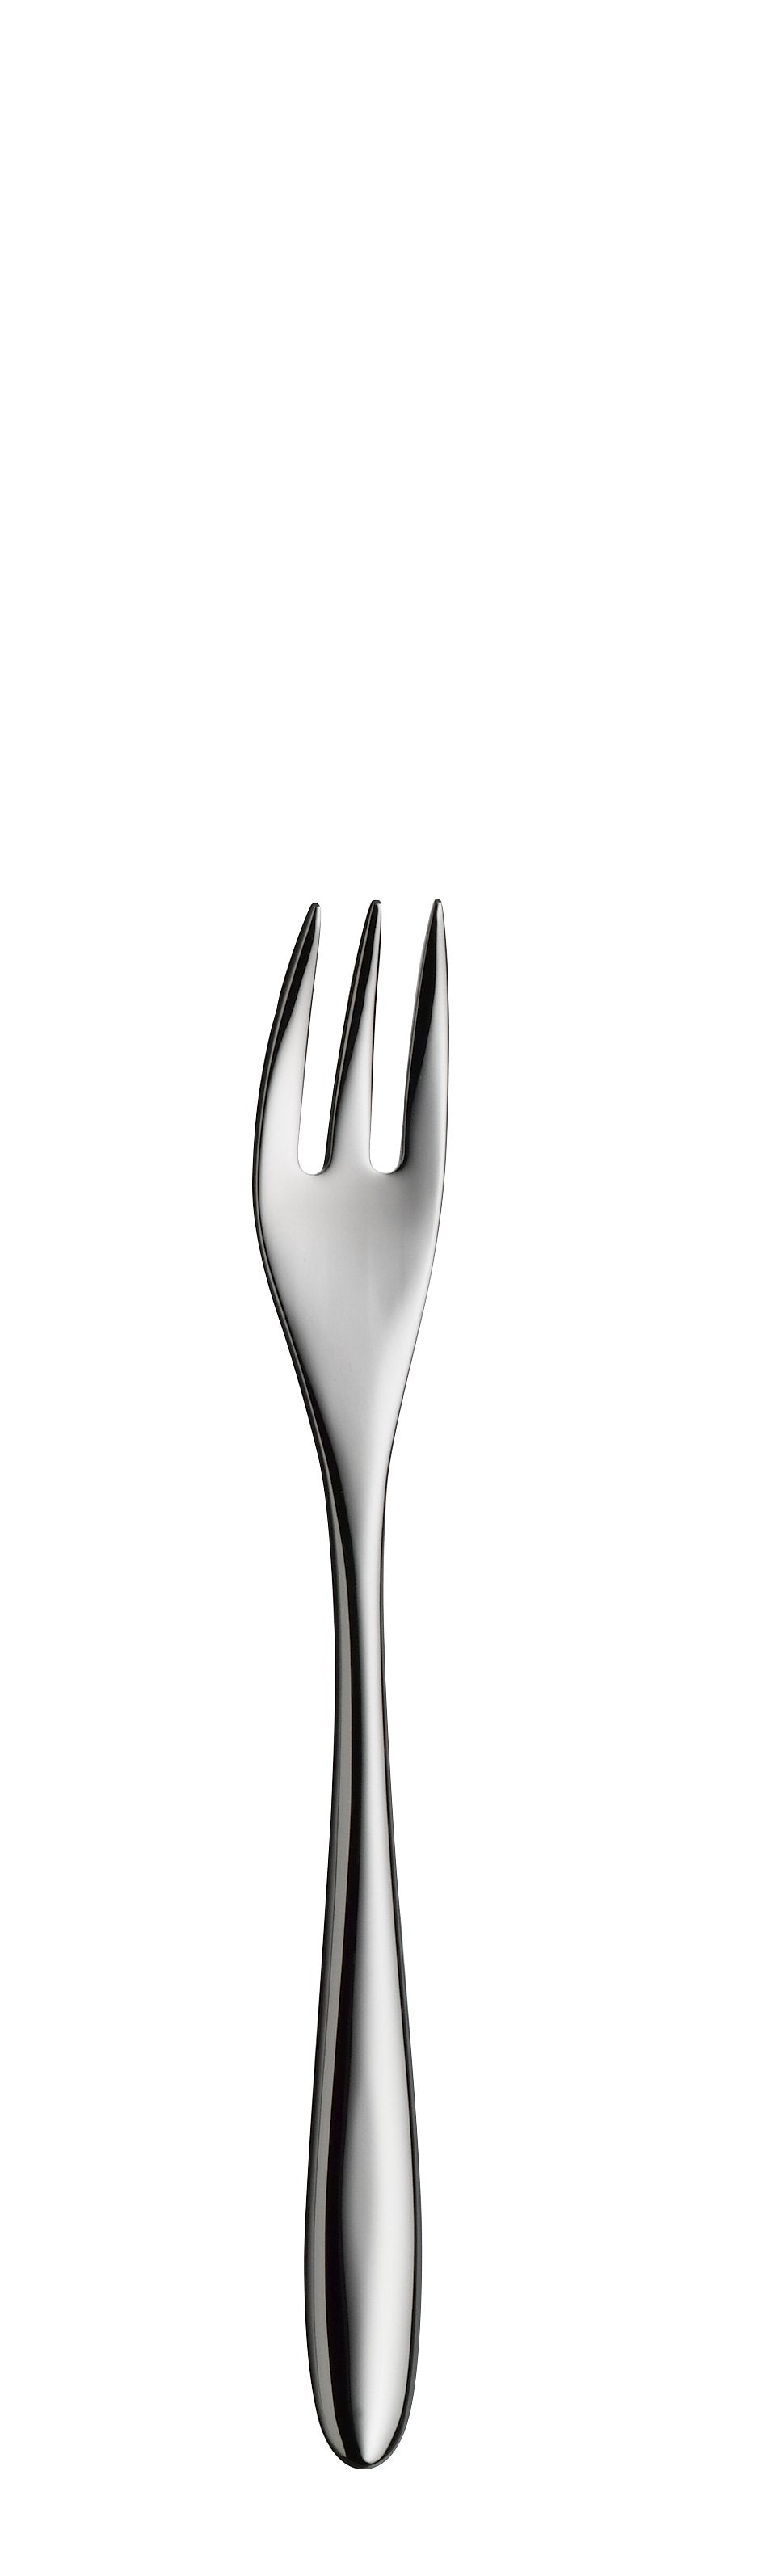 Cake fork AVES silverplated 160mm